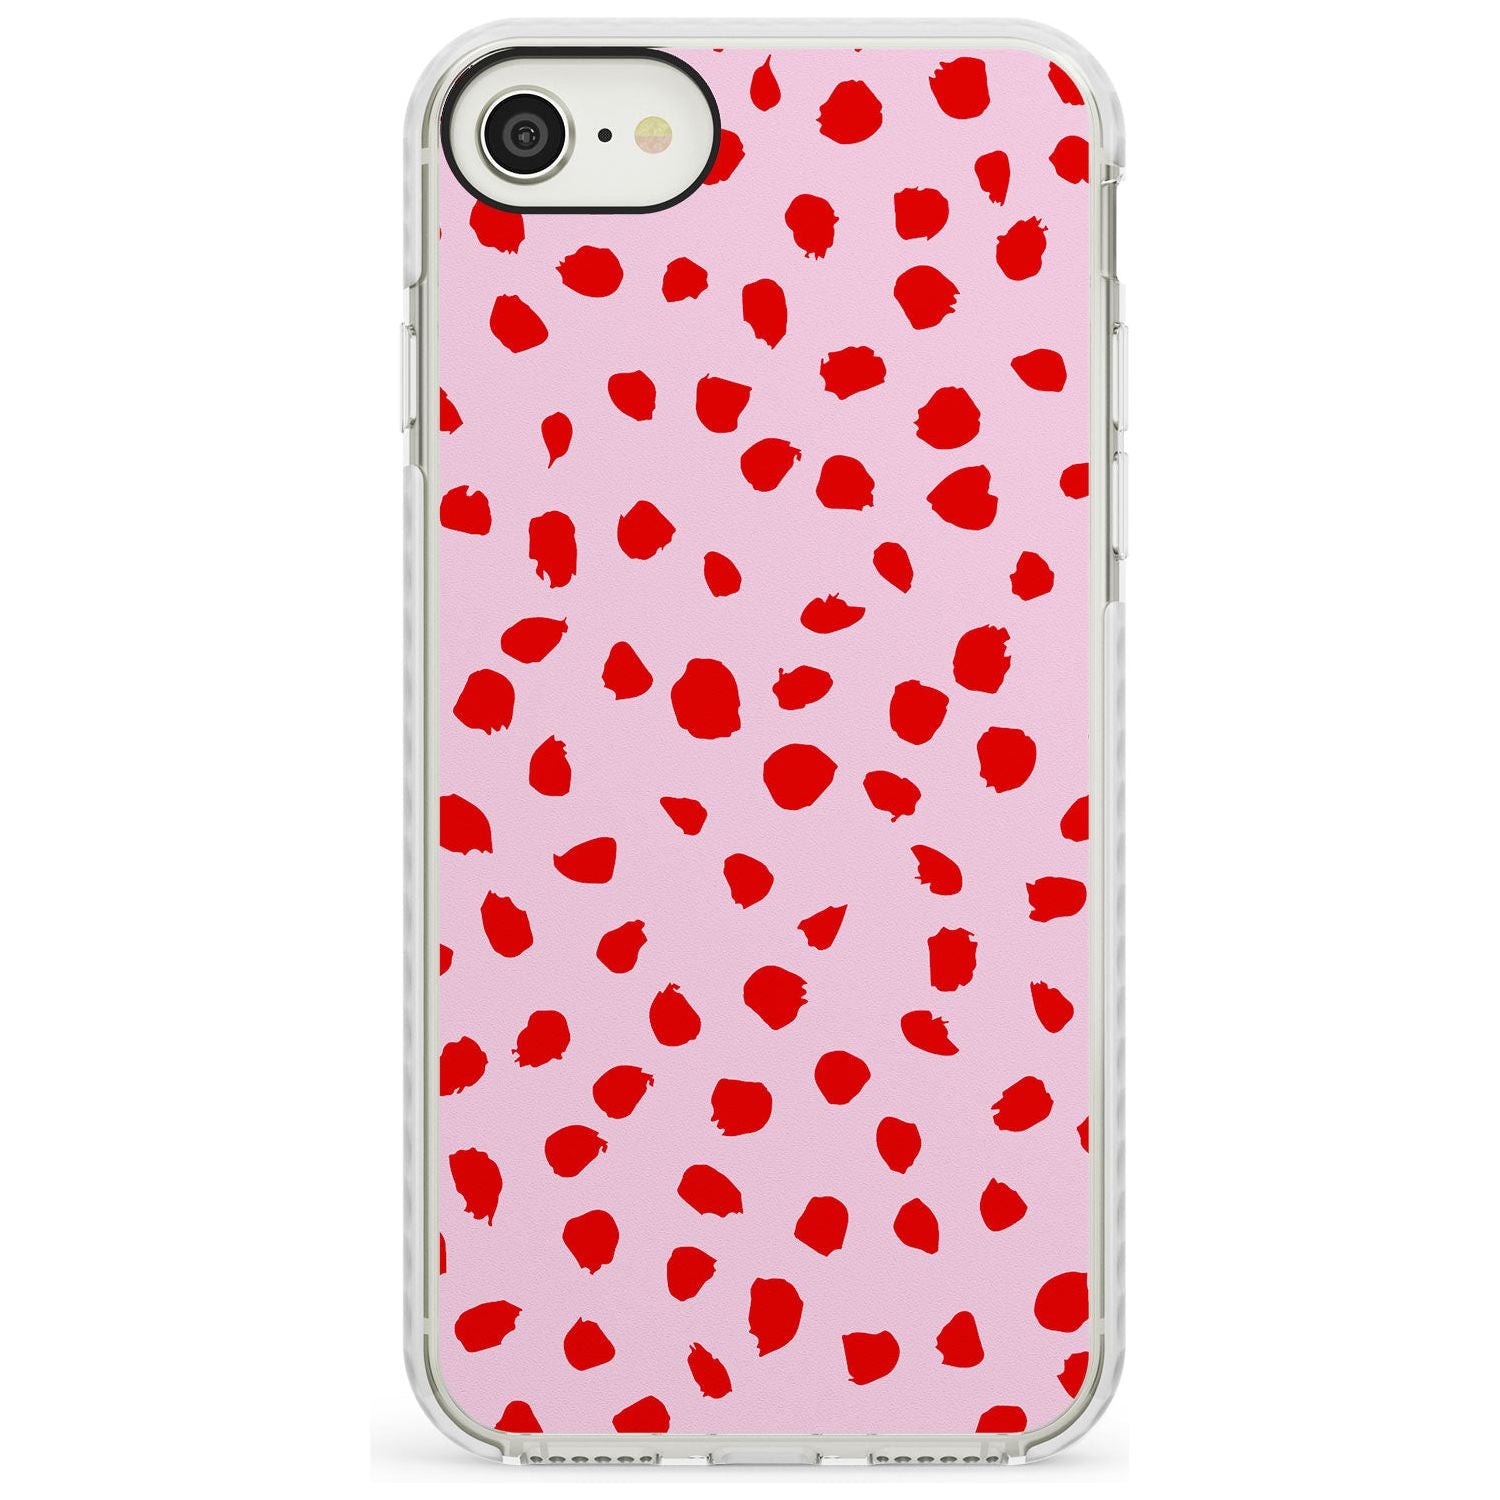 Red on Pink Dalmatian Polka Dot Spots Impact Phone Case for iPhone SE 8 7 Plus